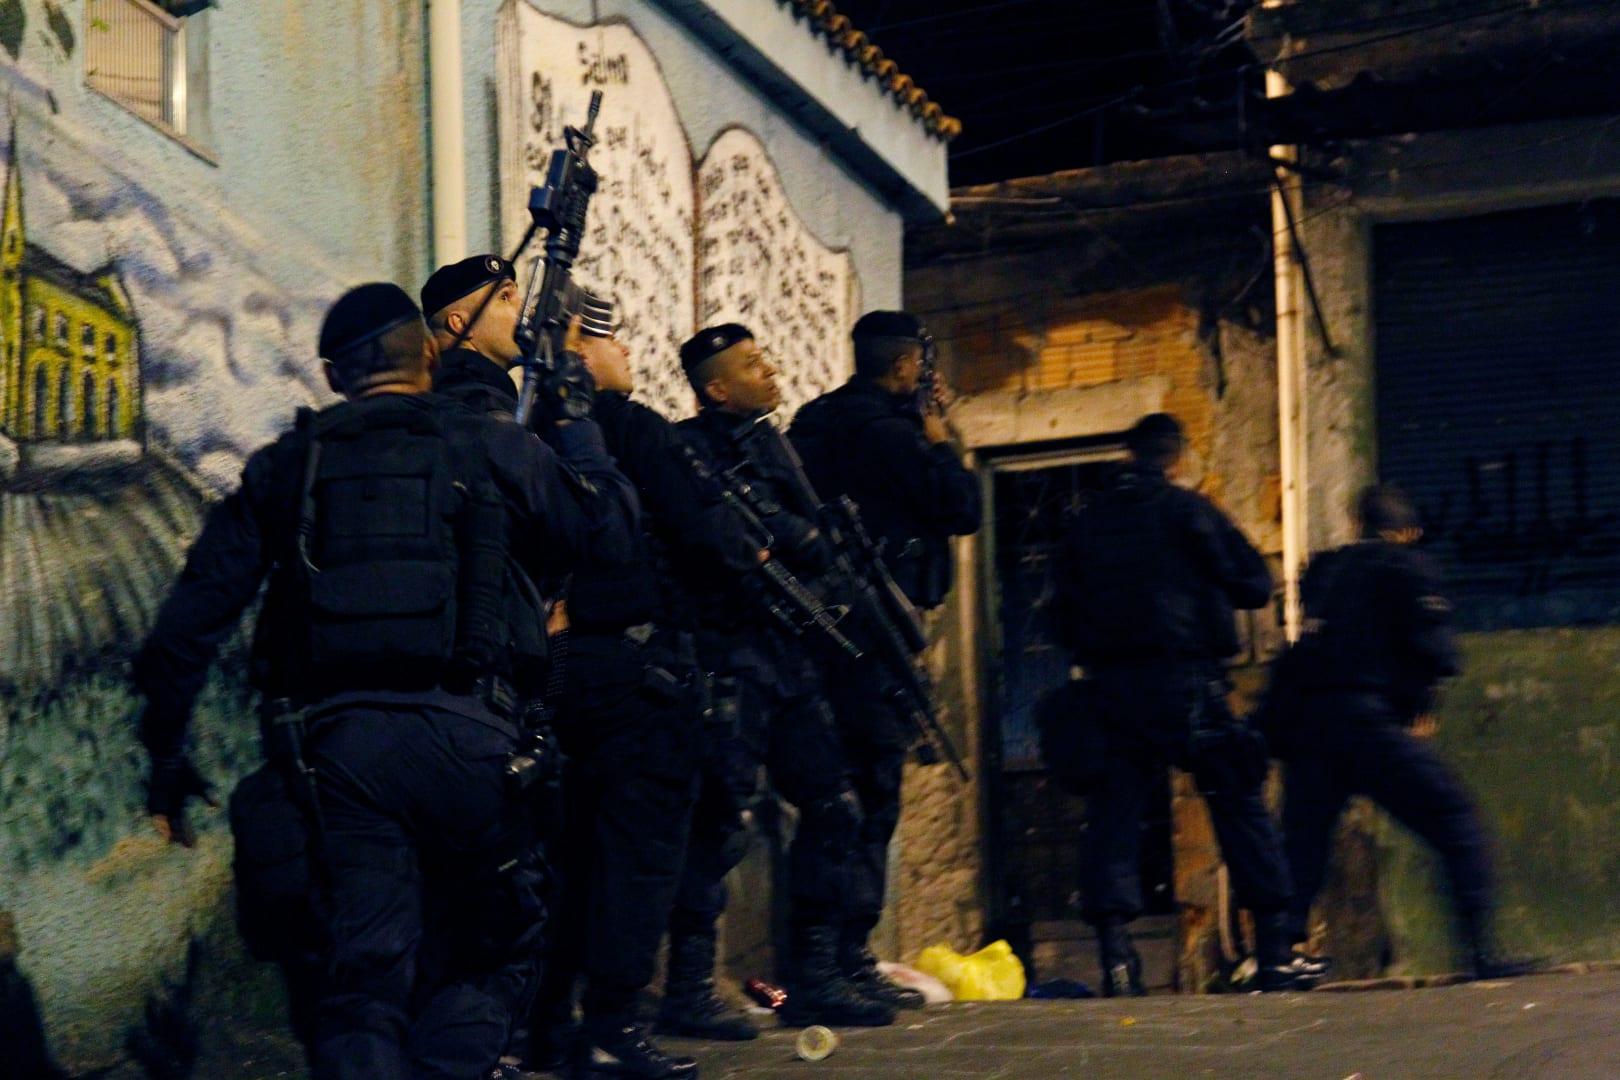 Brazil Federal Police carry out search and seizure warrants at medical researchers' homes